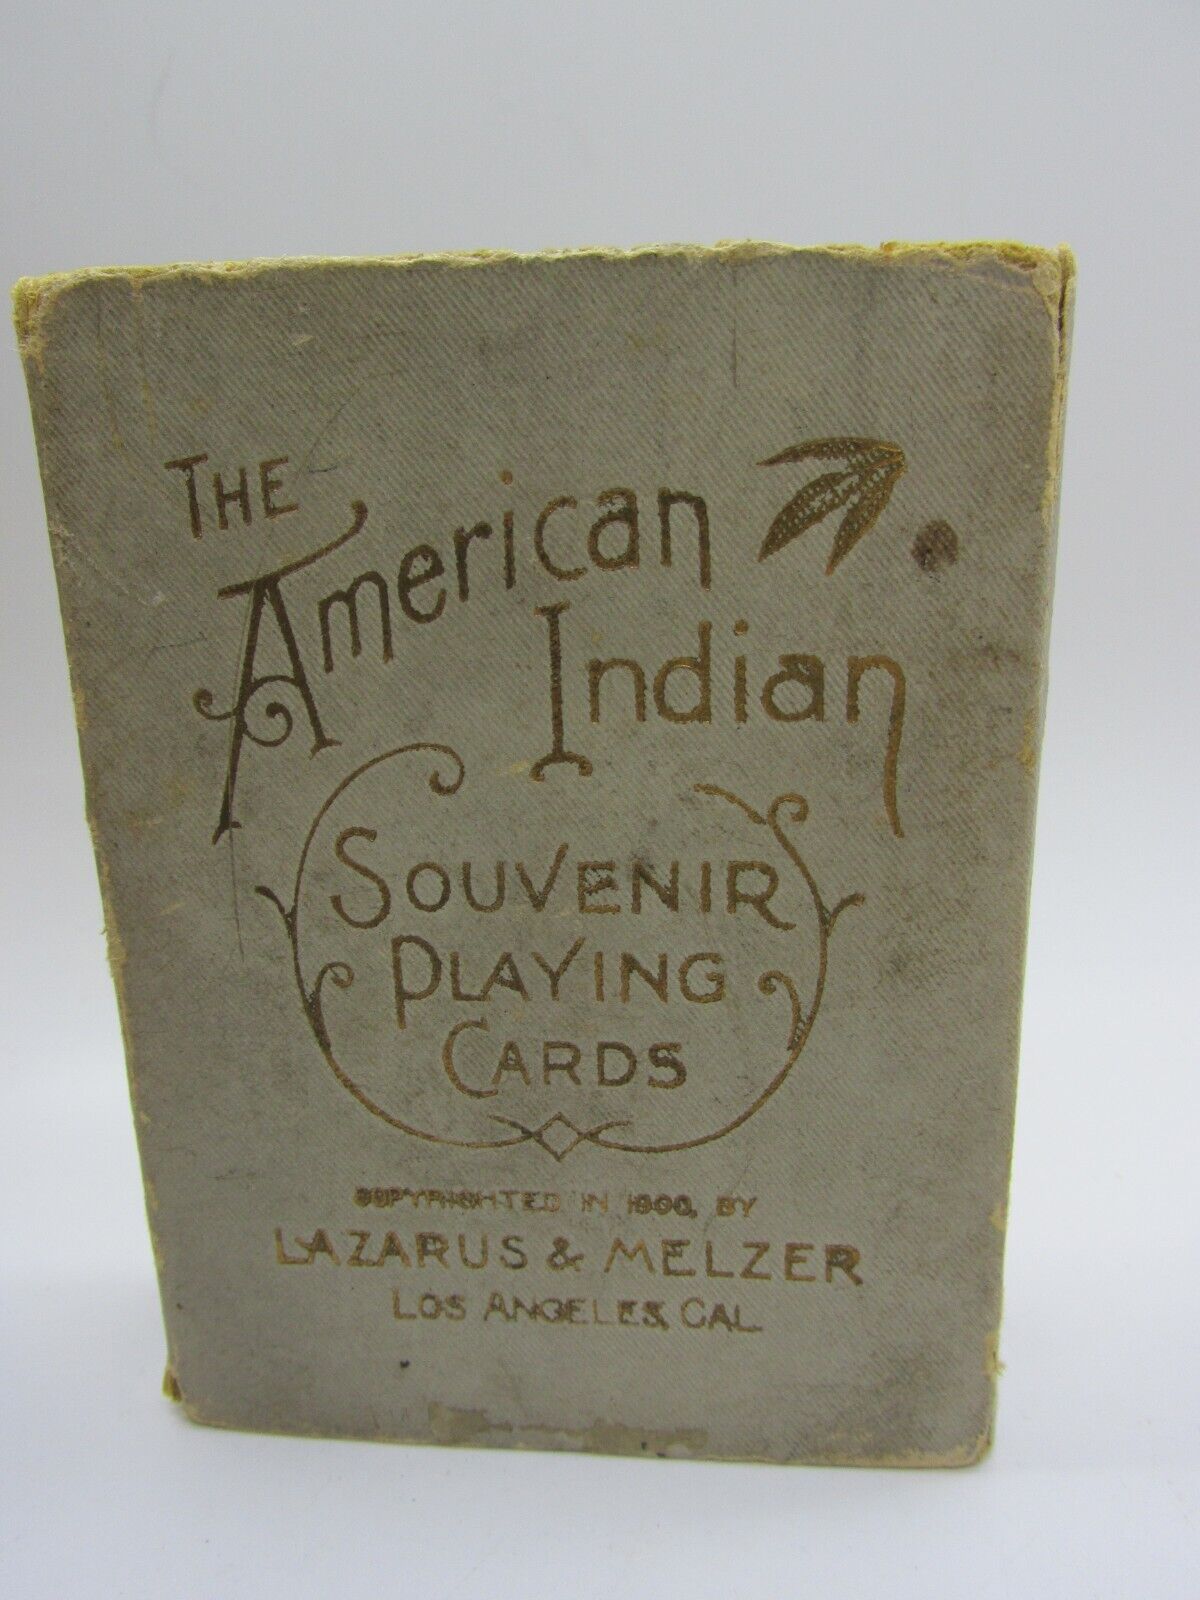 Antique c.1900 THE AMERICAN INDIAN Souvenir Playing Cards Minty Cards. Missing 2